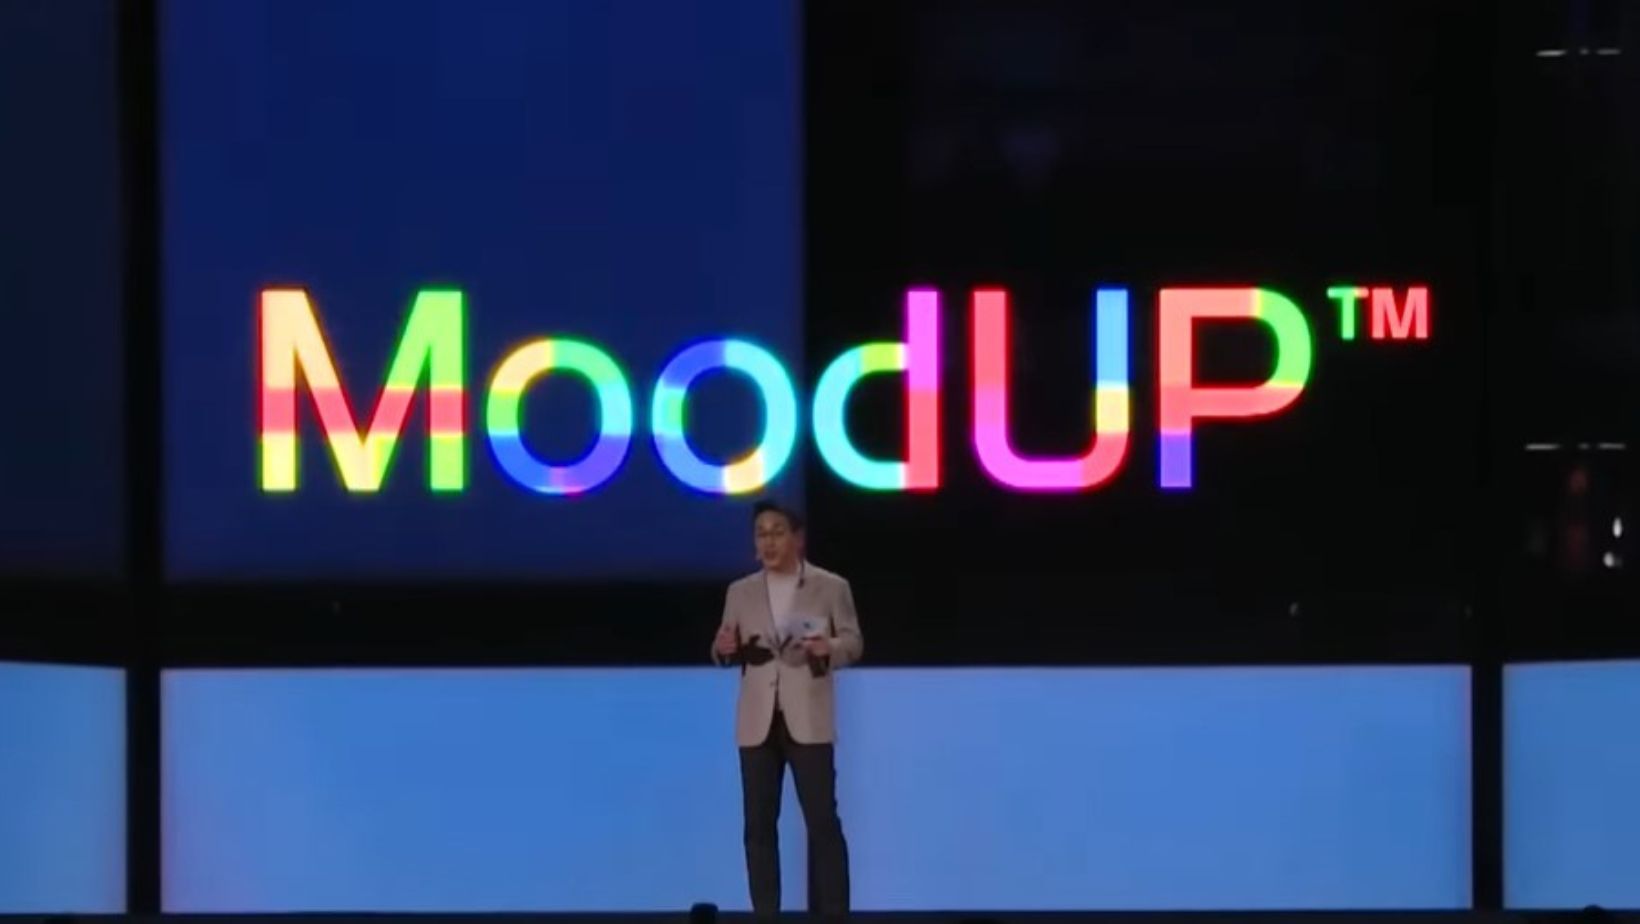 lg CEO stands in front of a screen that reads "MoodUp" in rainbow lettering